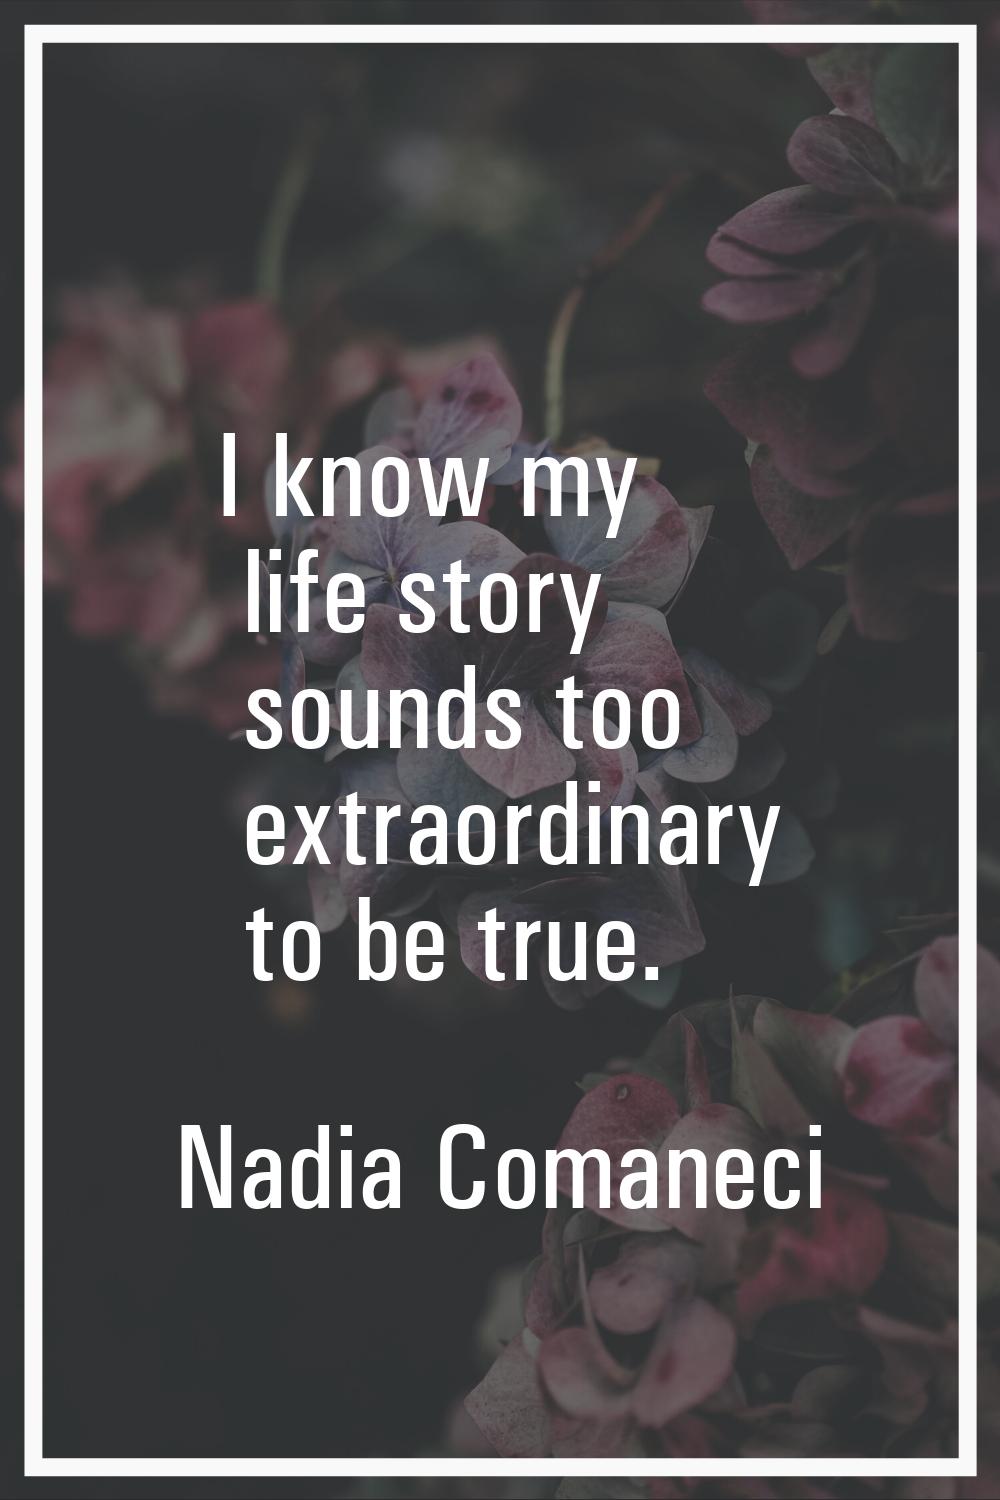 I know my life story sounds too extraordinary to be true.